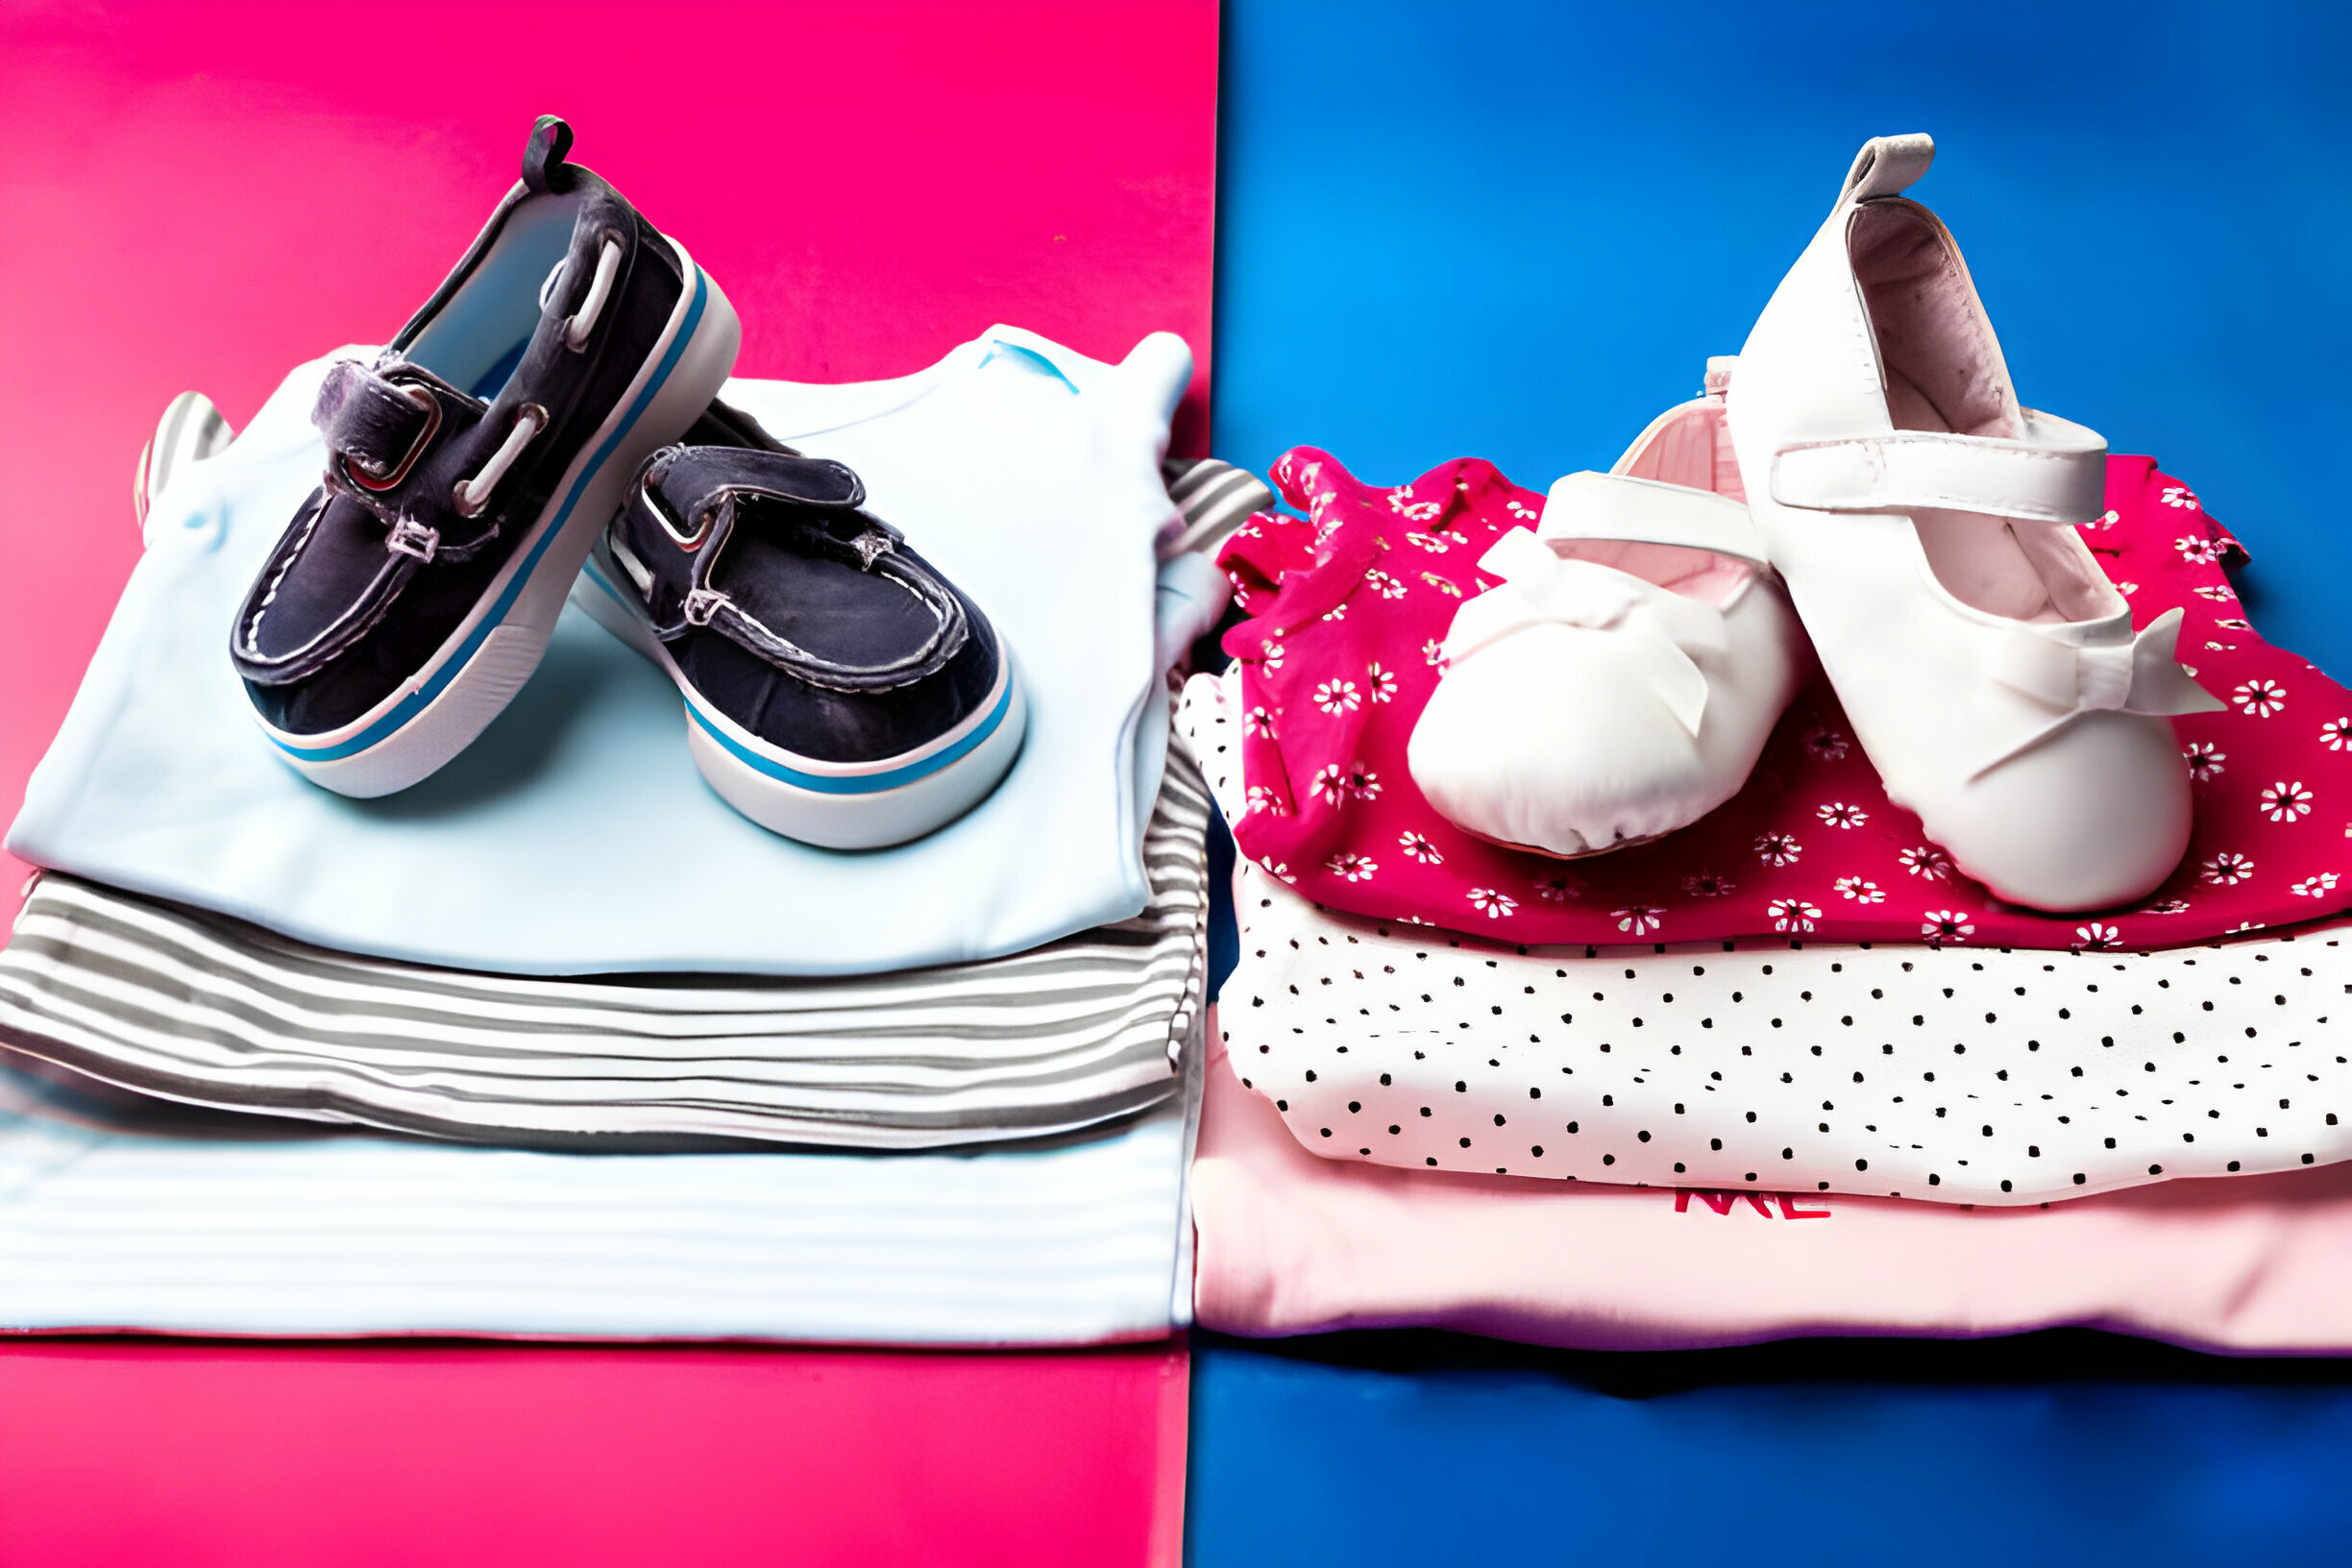 Newborn Photography Wardrobe Choices: What to Wear?